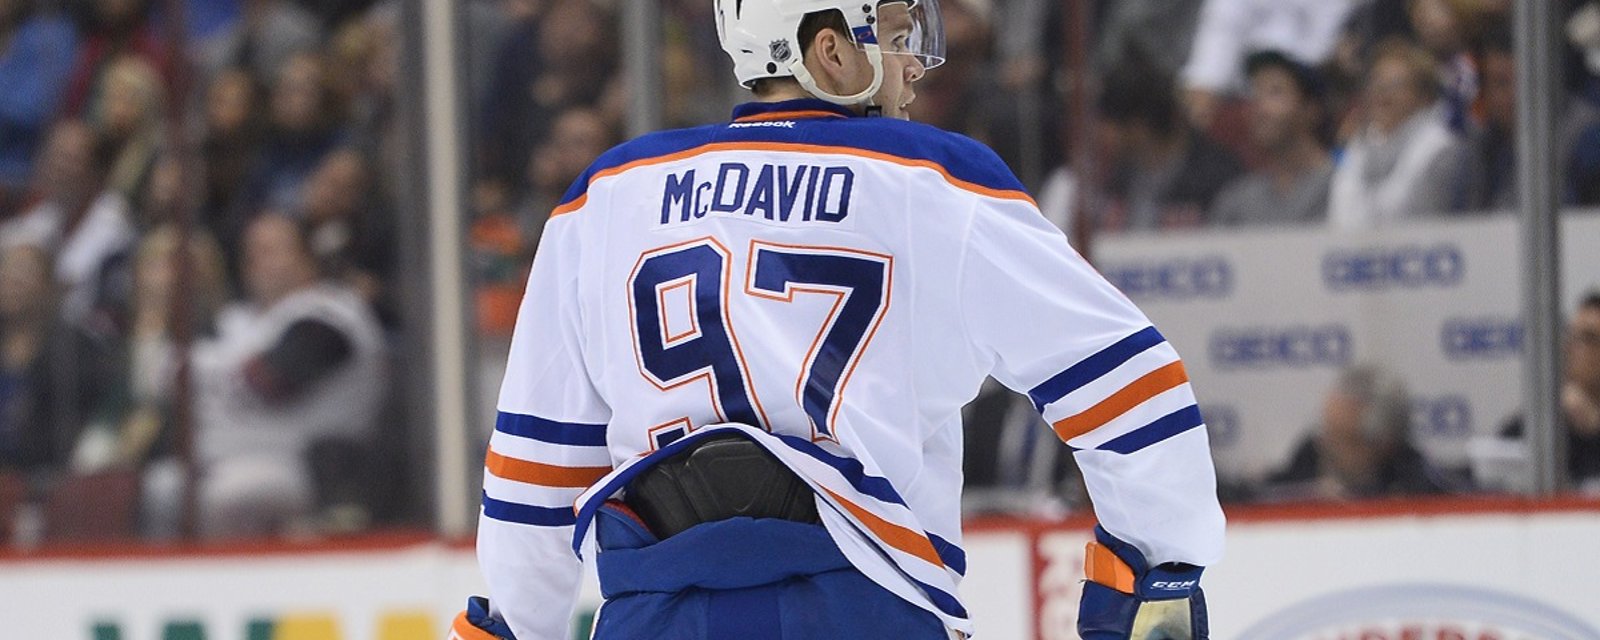 McDavid stunned both at the decision and timing of the NHL pulling him from the game.